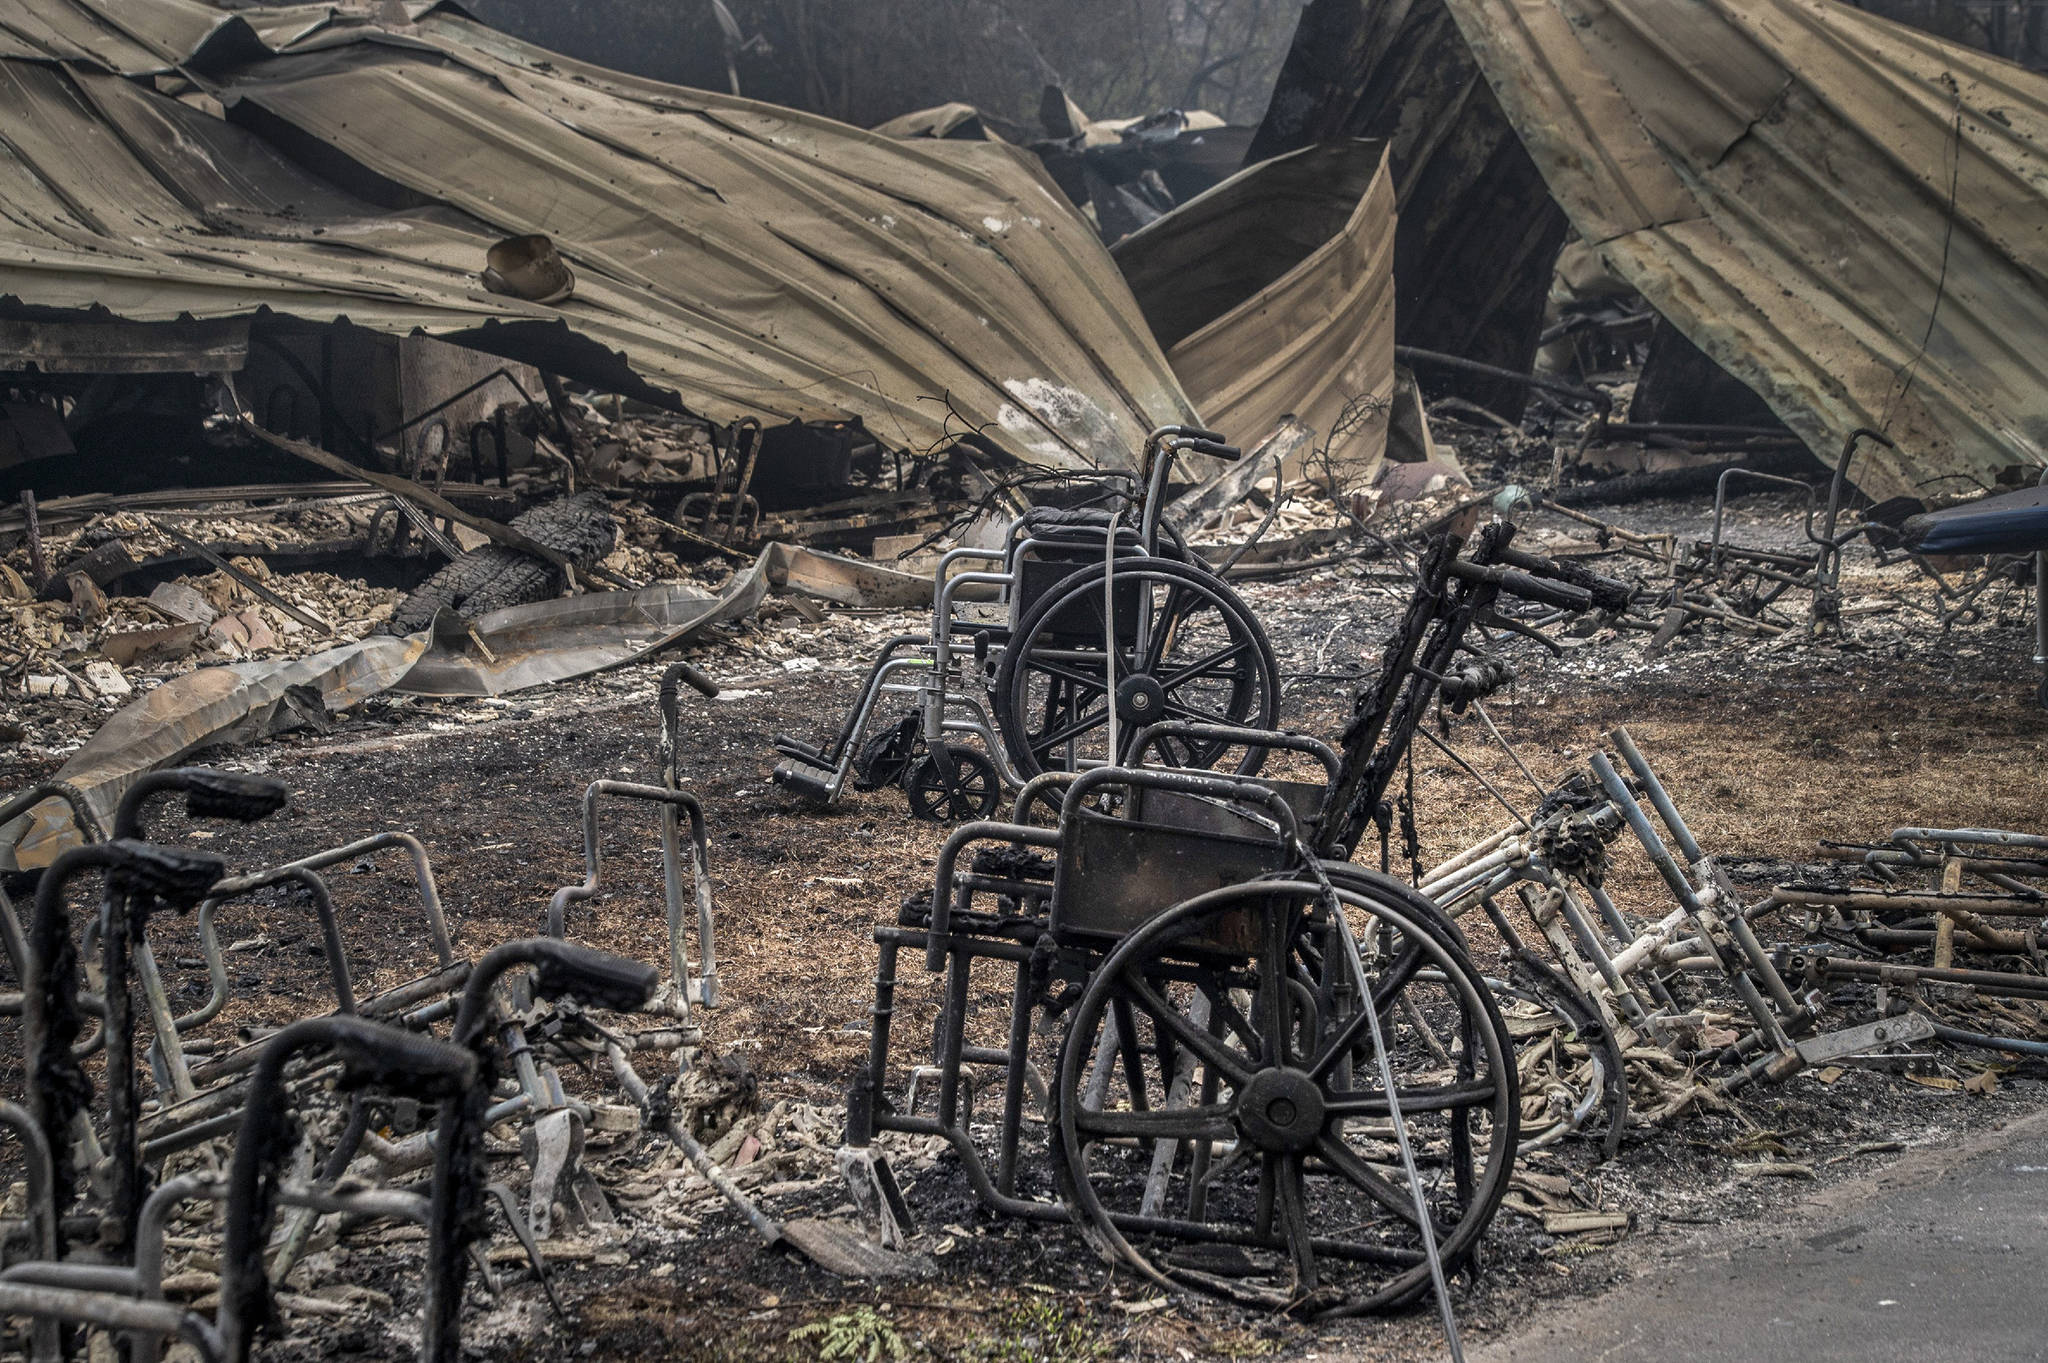 (Renee C. Byer/The Sacramento Bee/TNS) Burned wheelchairs are all that remain from a senior care facility from the Camp Fire Thursday Nov. 15, 2018 in Paradise, Calif.